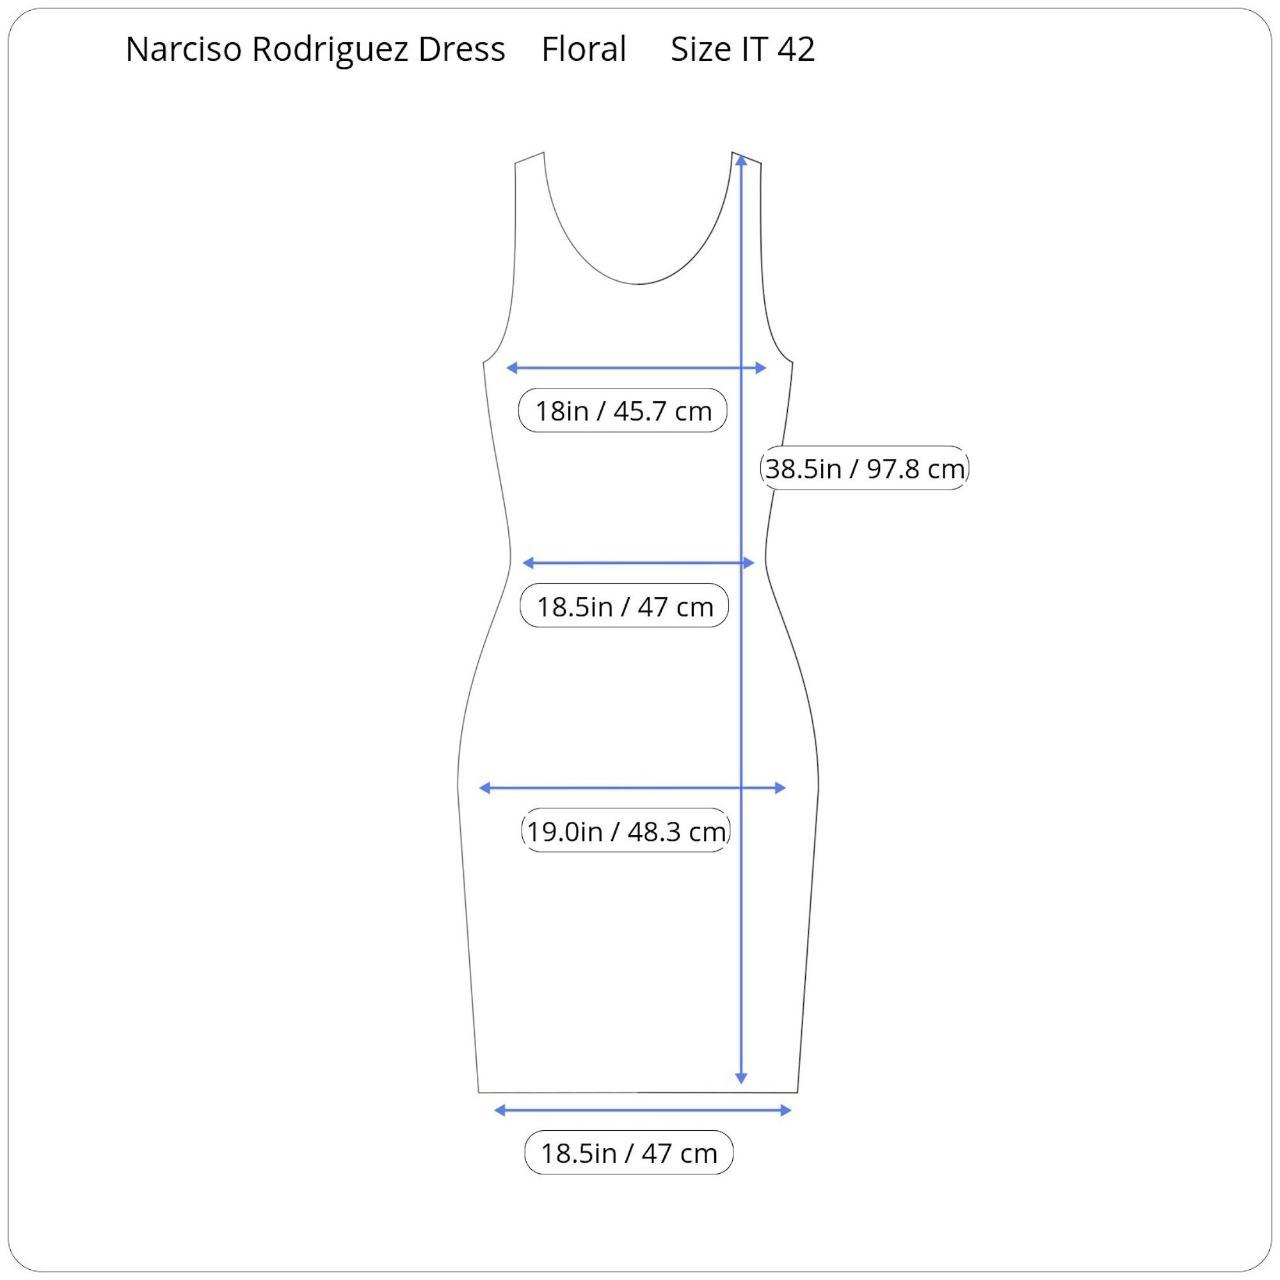 Narciso Rodriguez Women's White and Black Dress (4)